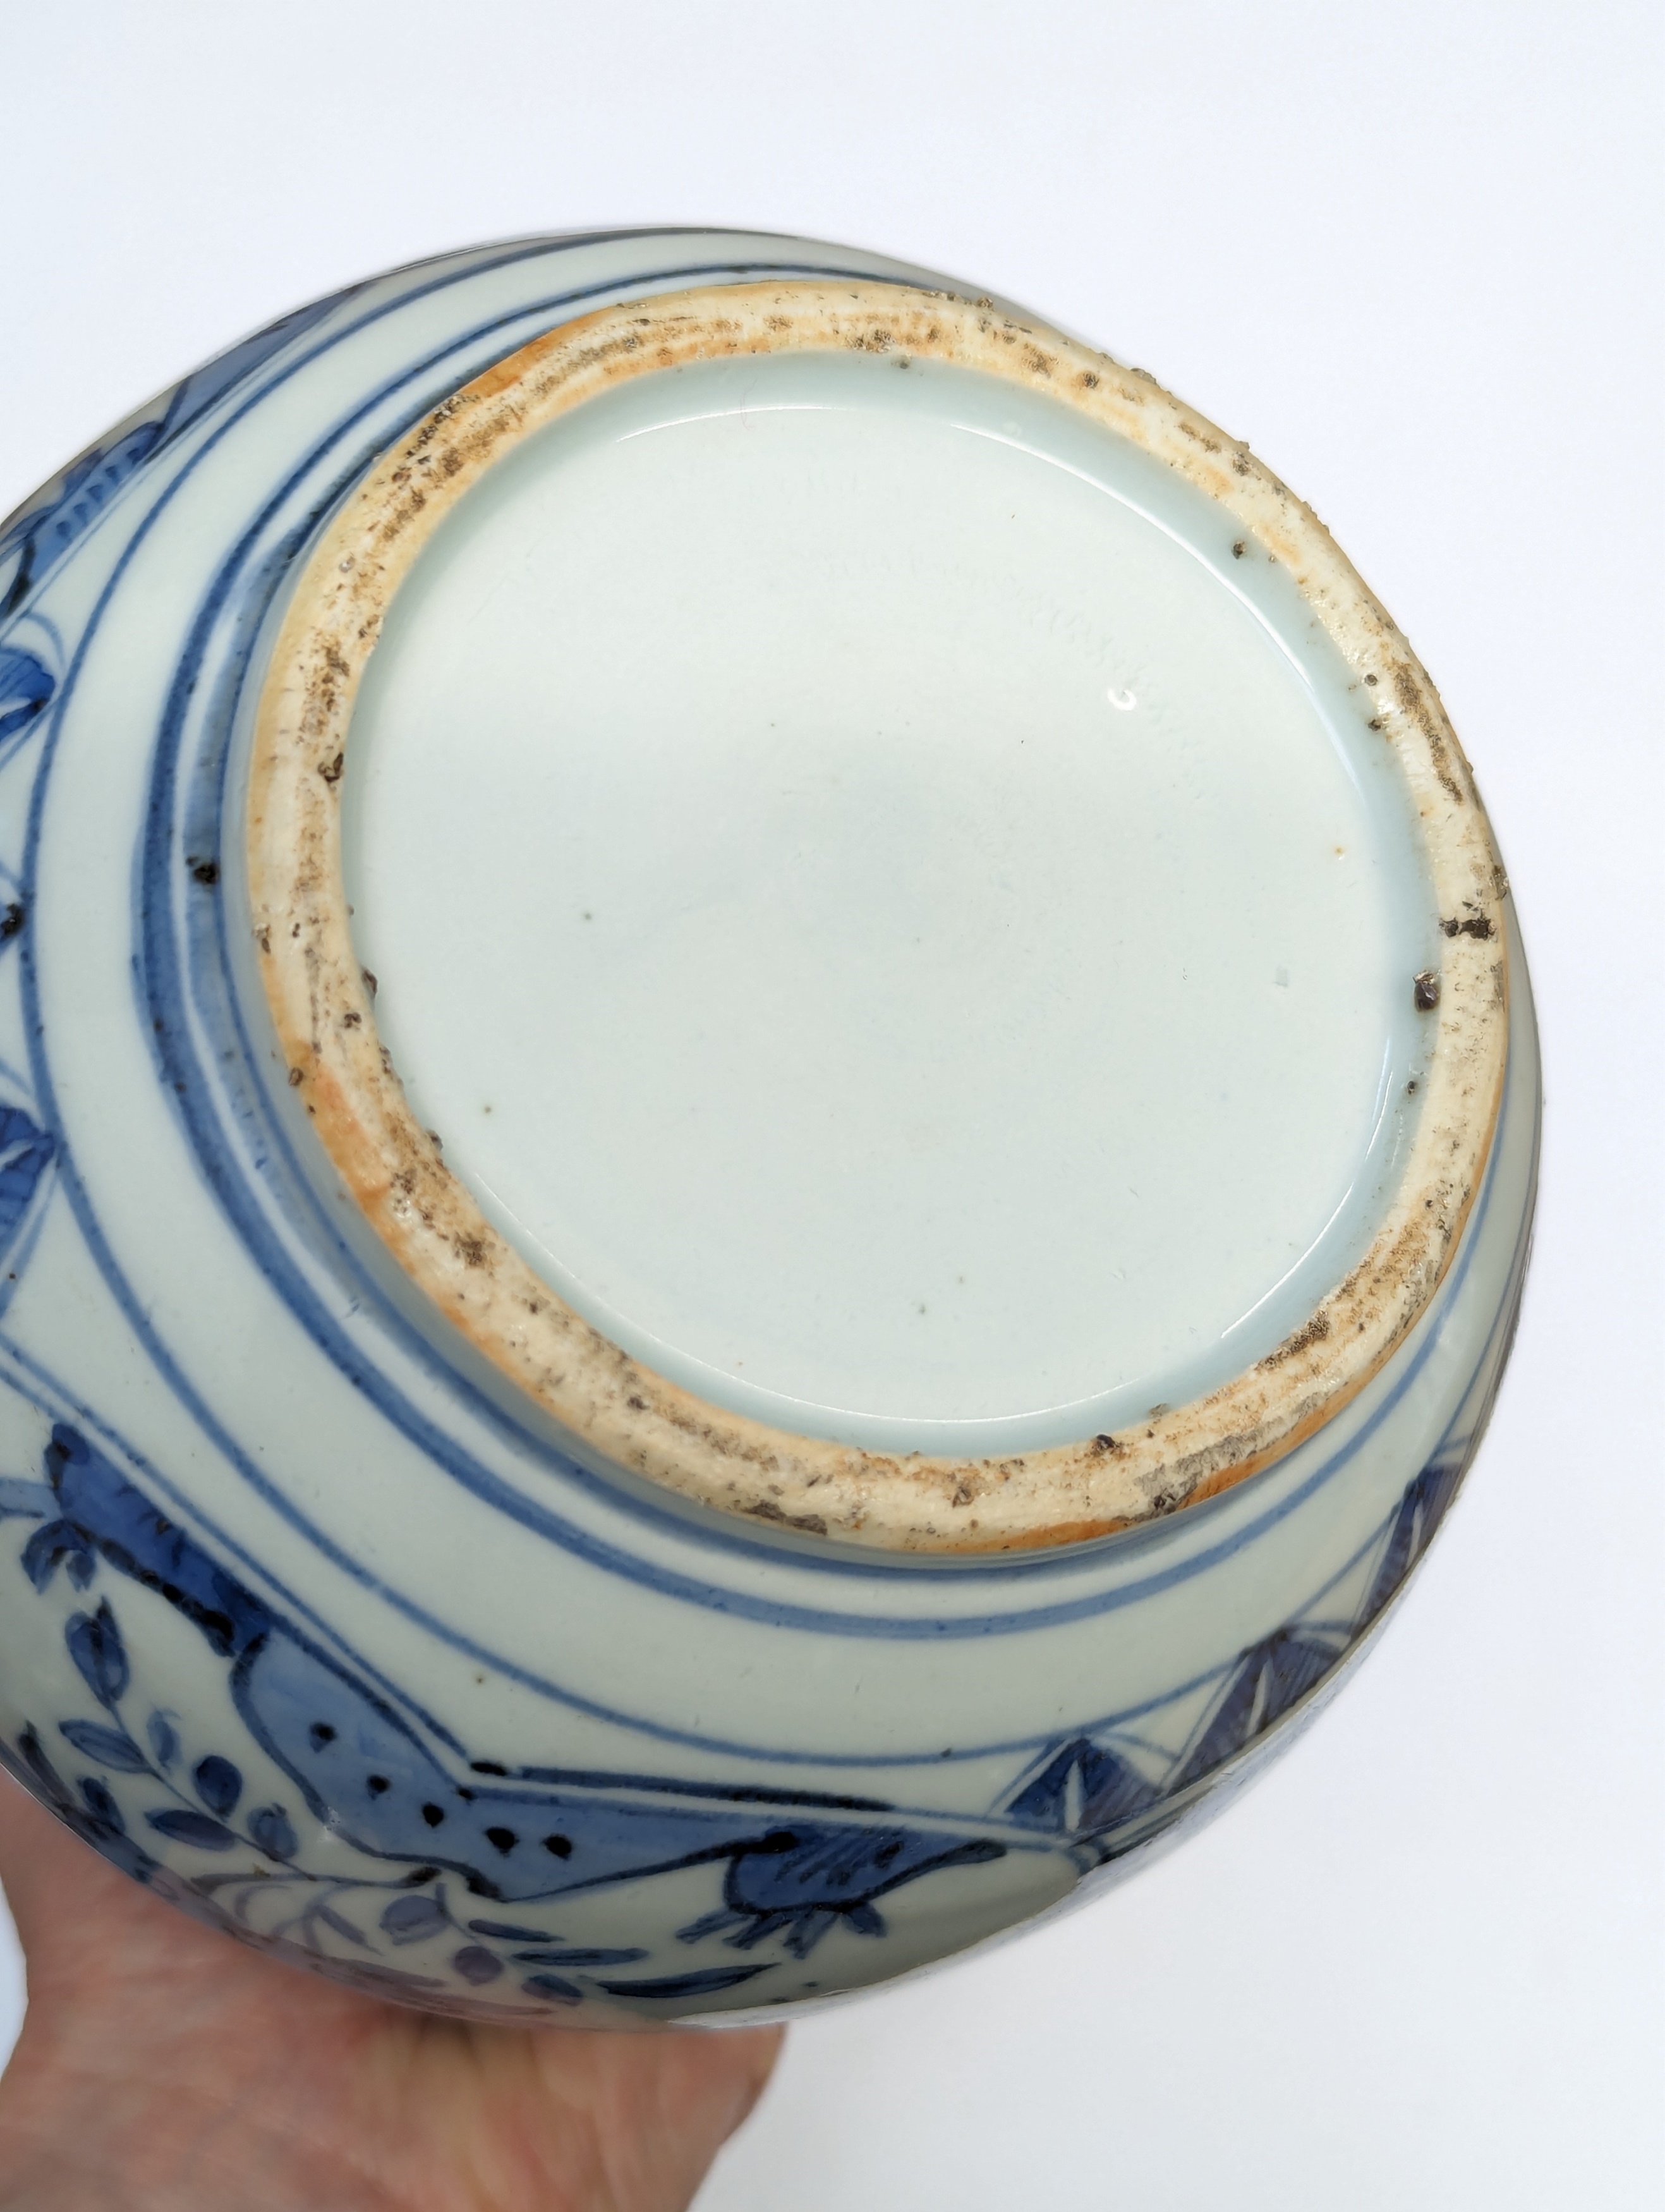 A CHINESE MING-STYLE BLUE AND WHITE DOUBLE GOURD VASE 二十世紀 明式青花葫蘆瓶 - Image 9 of 10